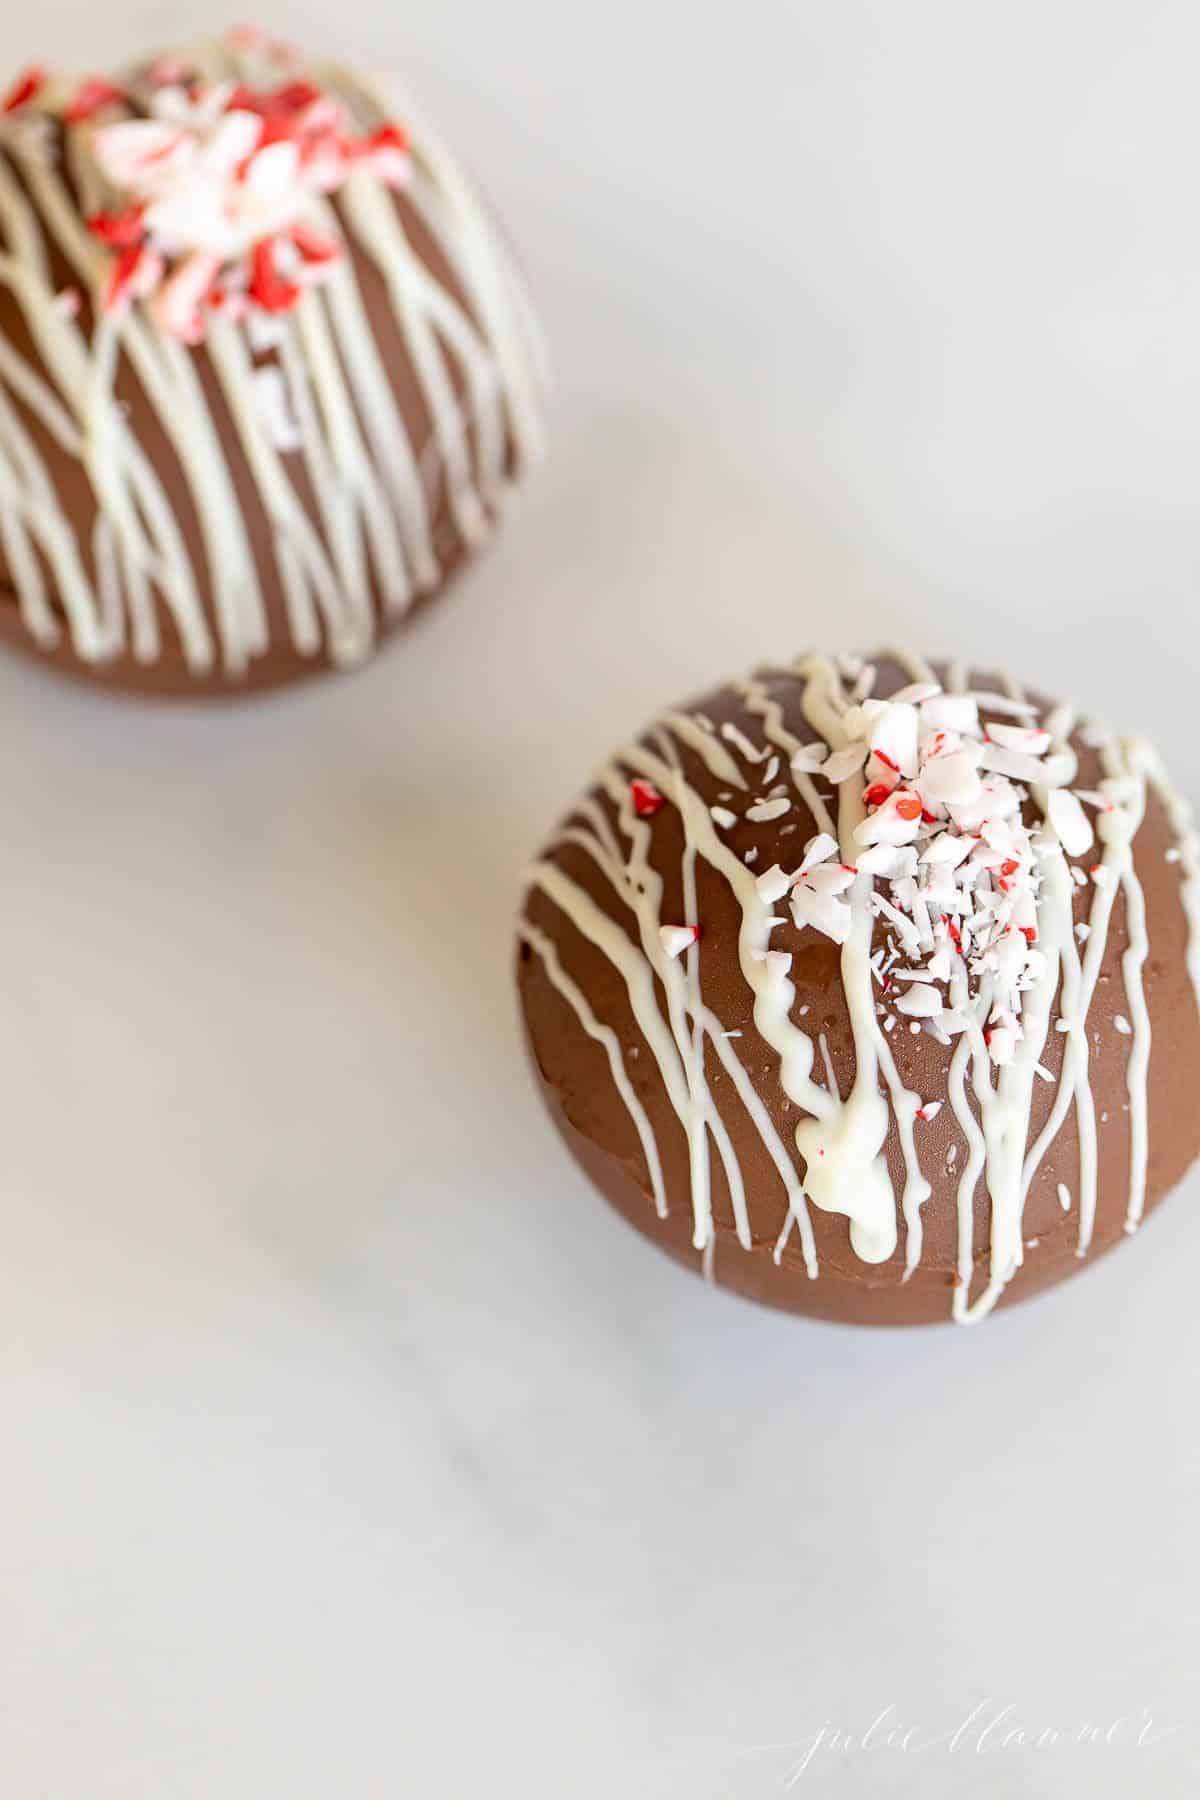 Two hot chocolate bombs on a marble surface, topped with crushed peppermint.